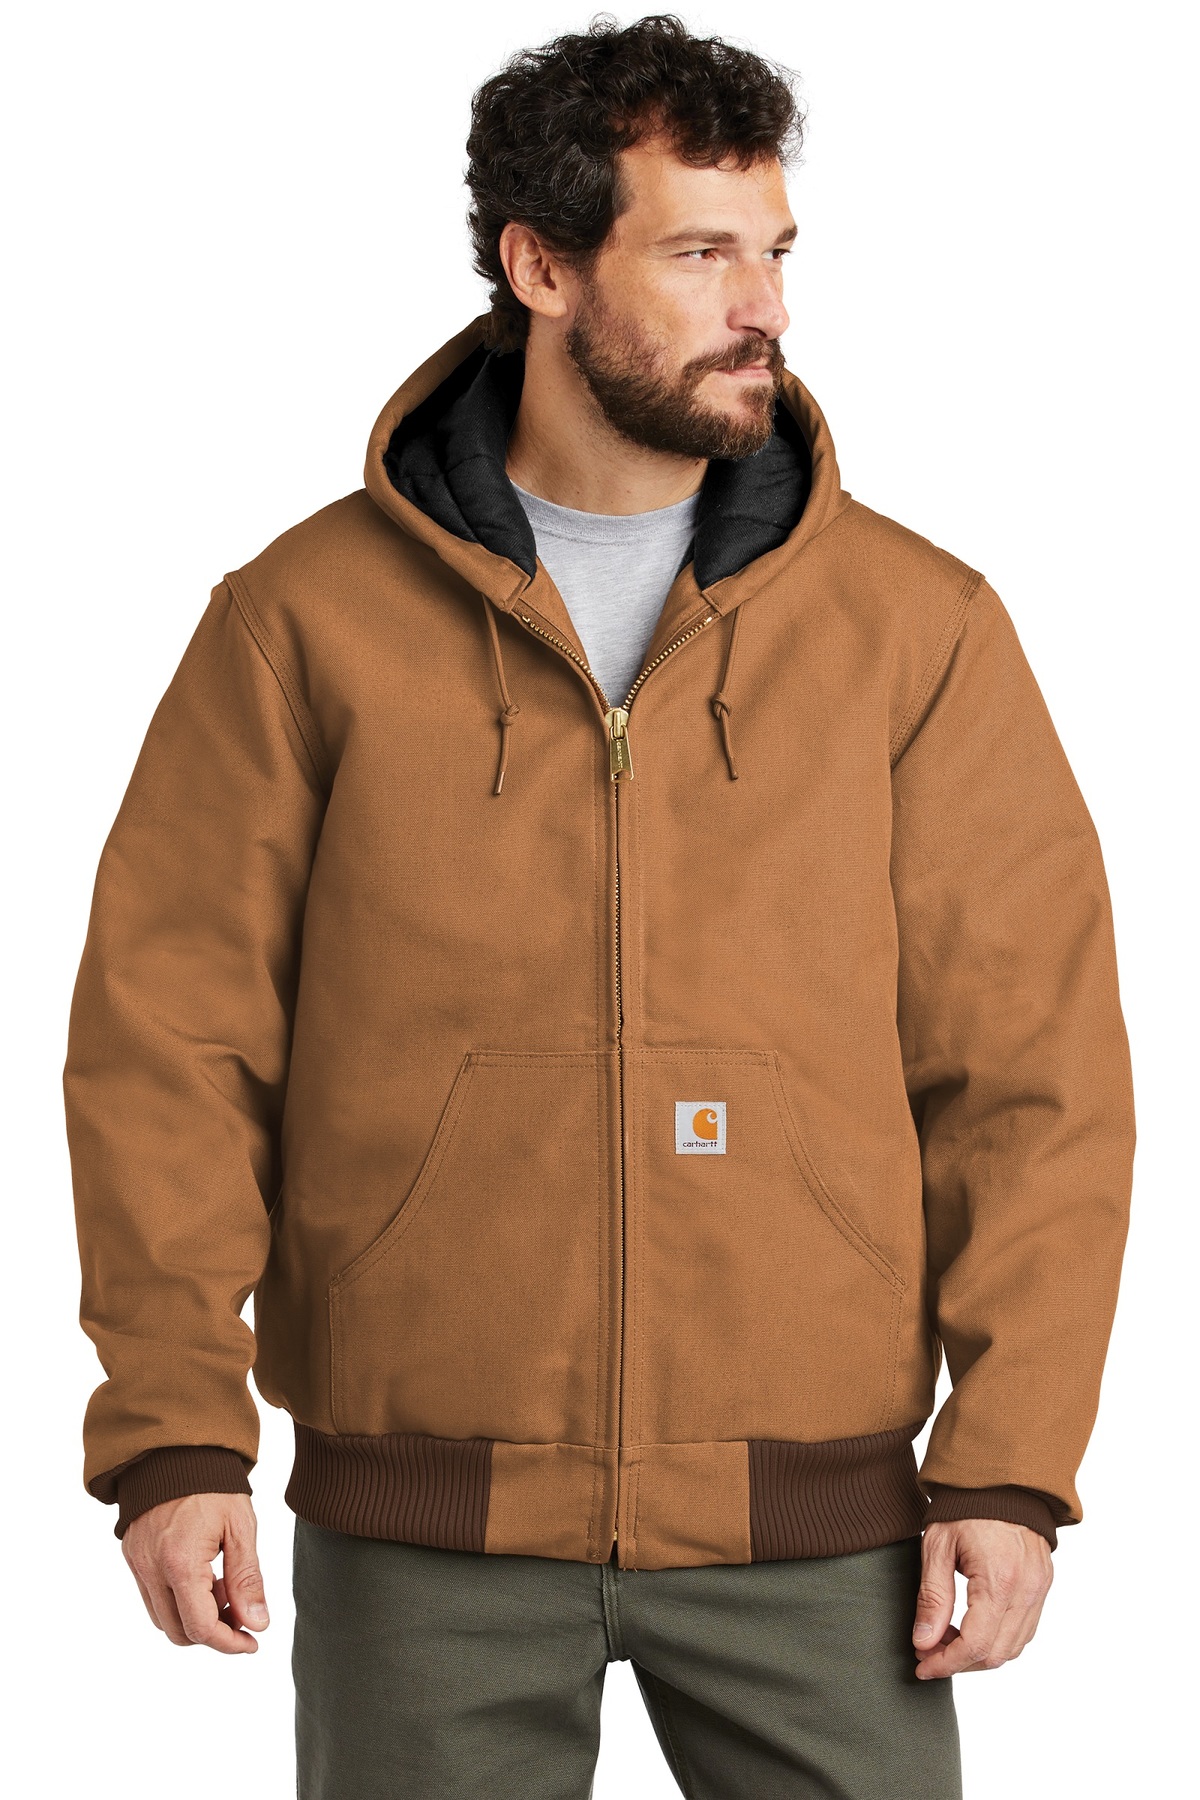 Carhartt Embroidered Men's Quilted-Flannel-Lined Duck Active Jacket ...